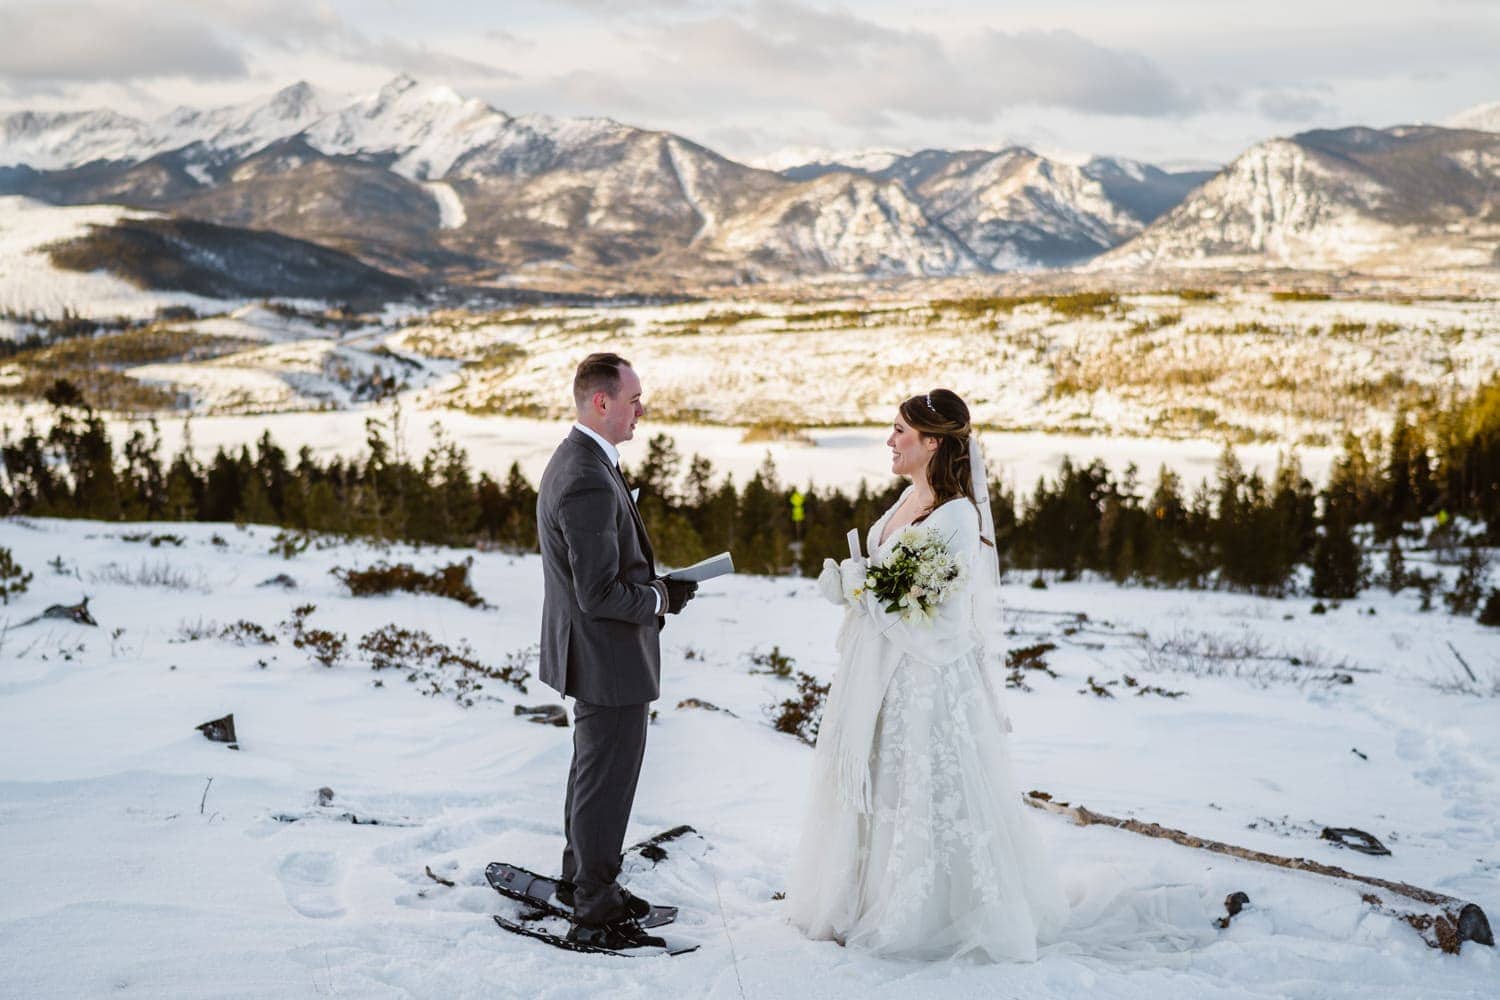 Vow ceremony at sunrise in the winter time in Colorado.